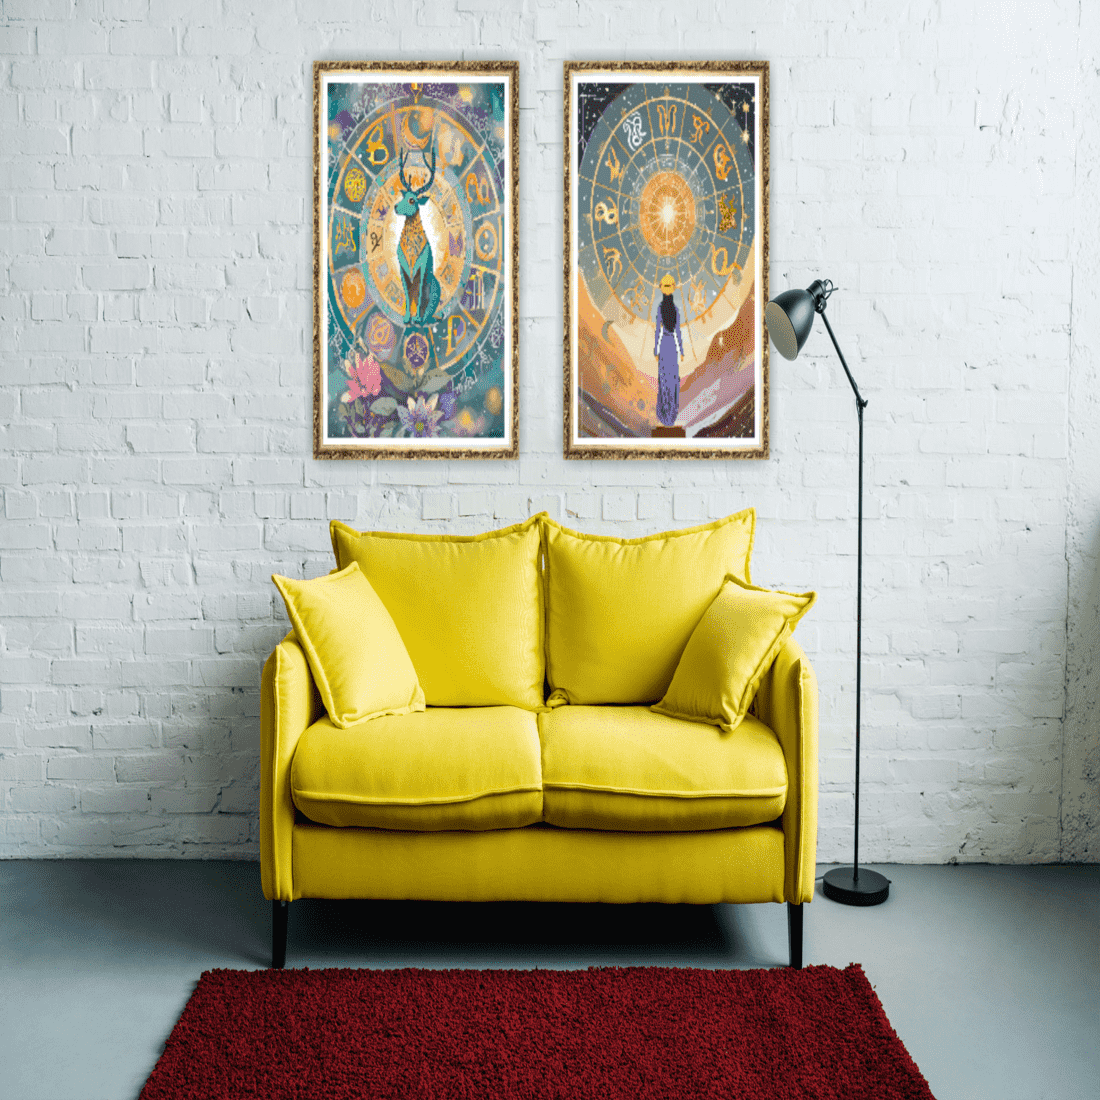 Celestial Harmony: Zodiac Signs and Astrology Wall Art Collection (8 High quality images) preview image.